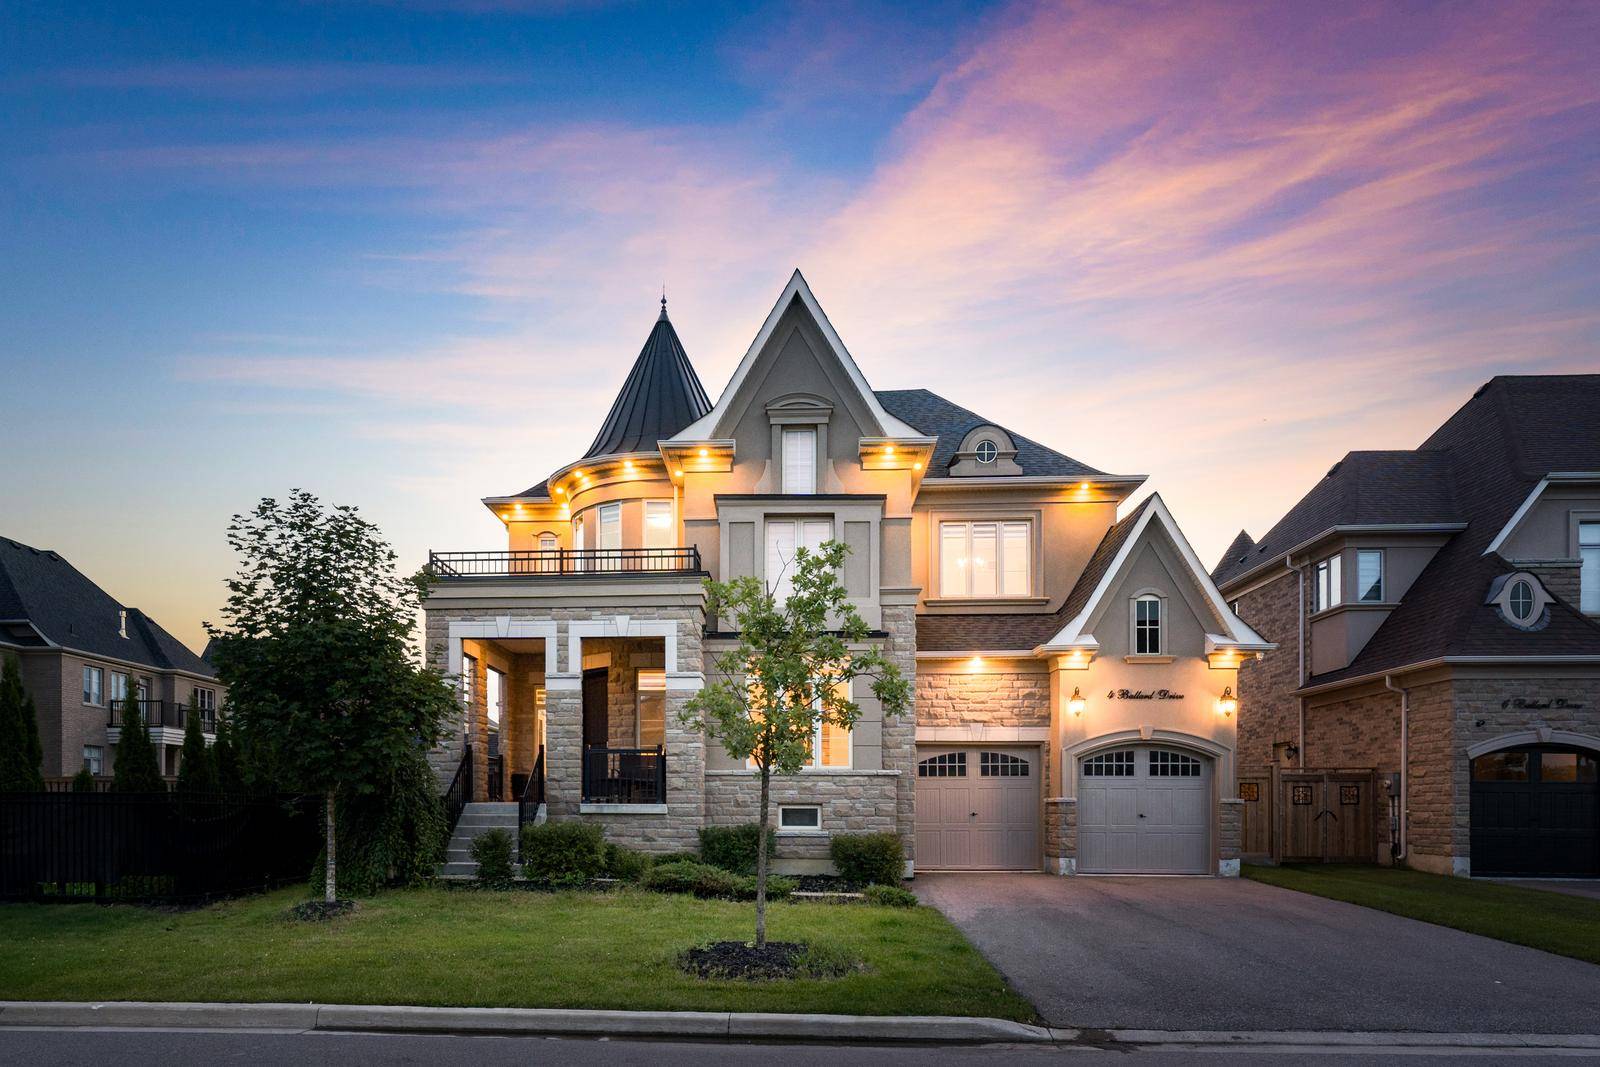 4 Bdrm Home in the Gates of Nobleton